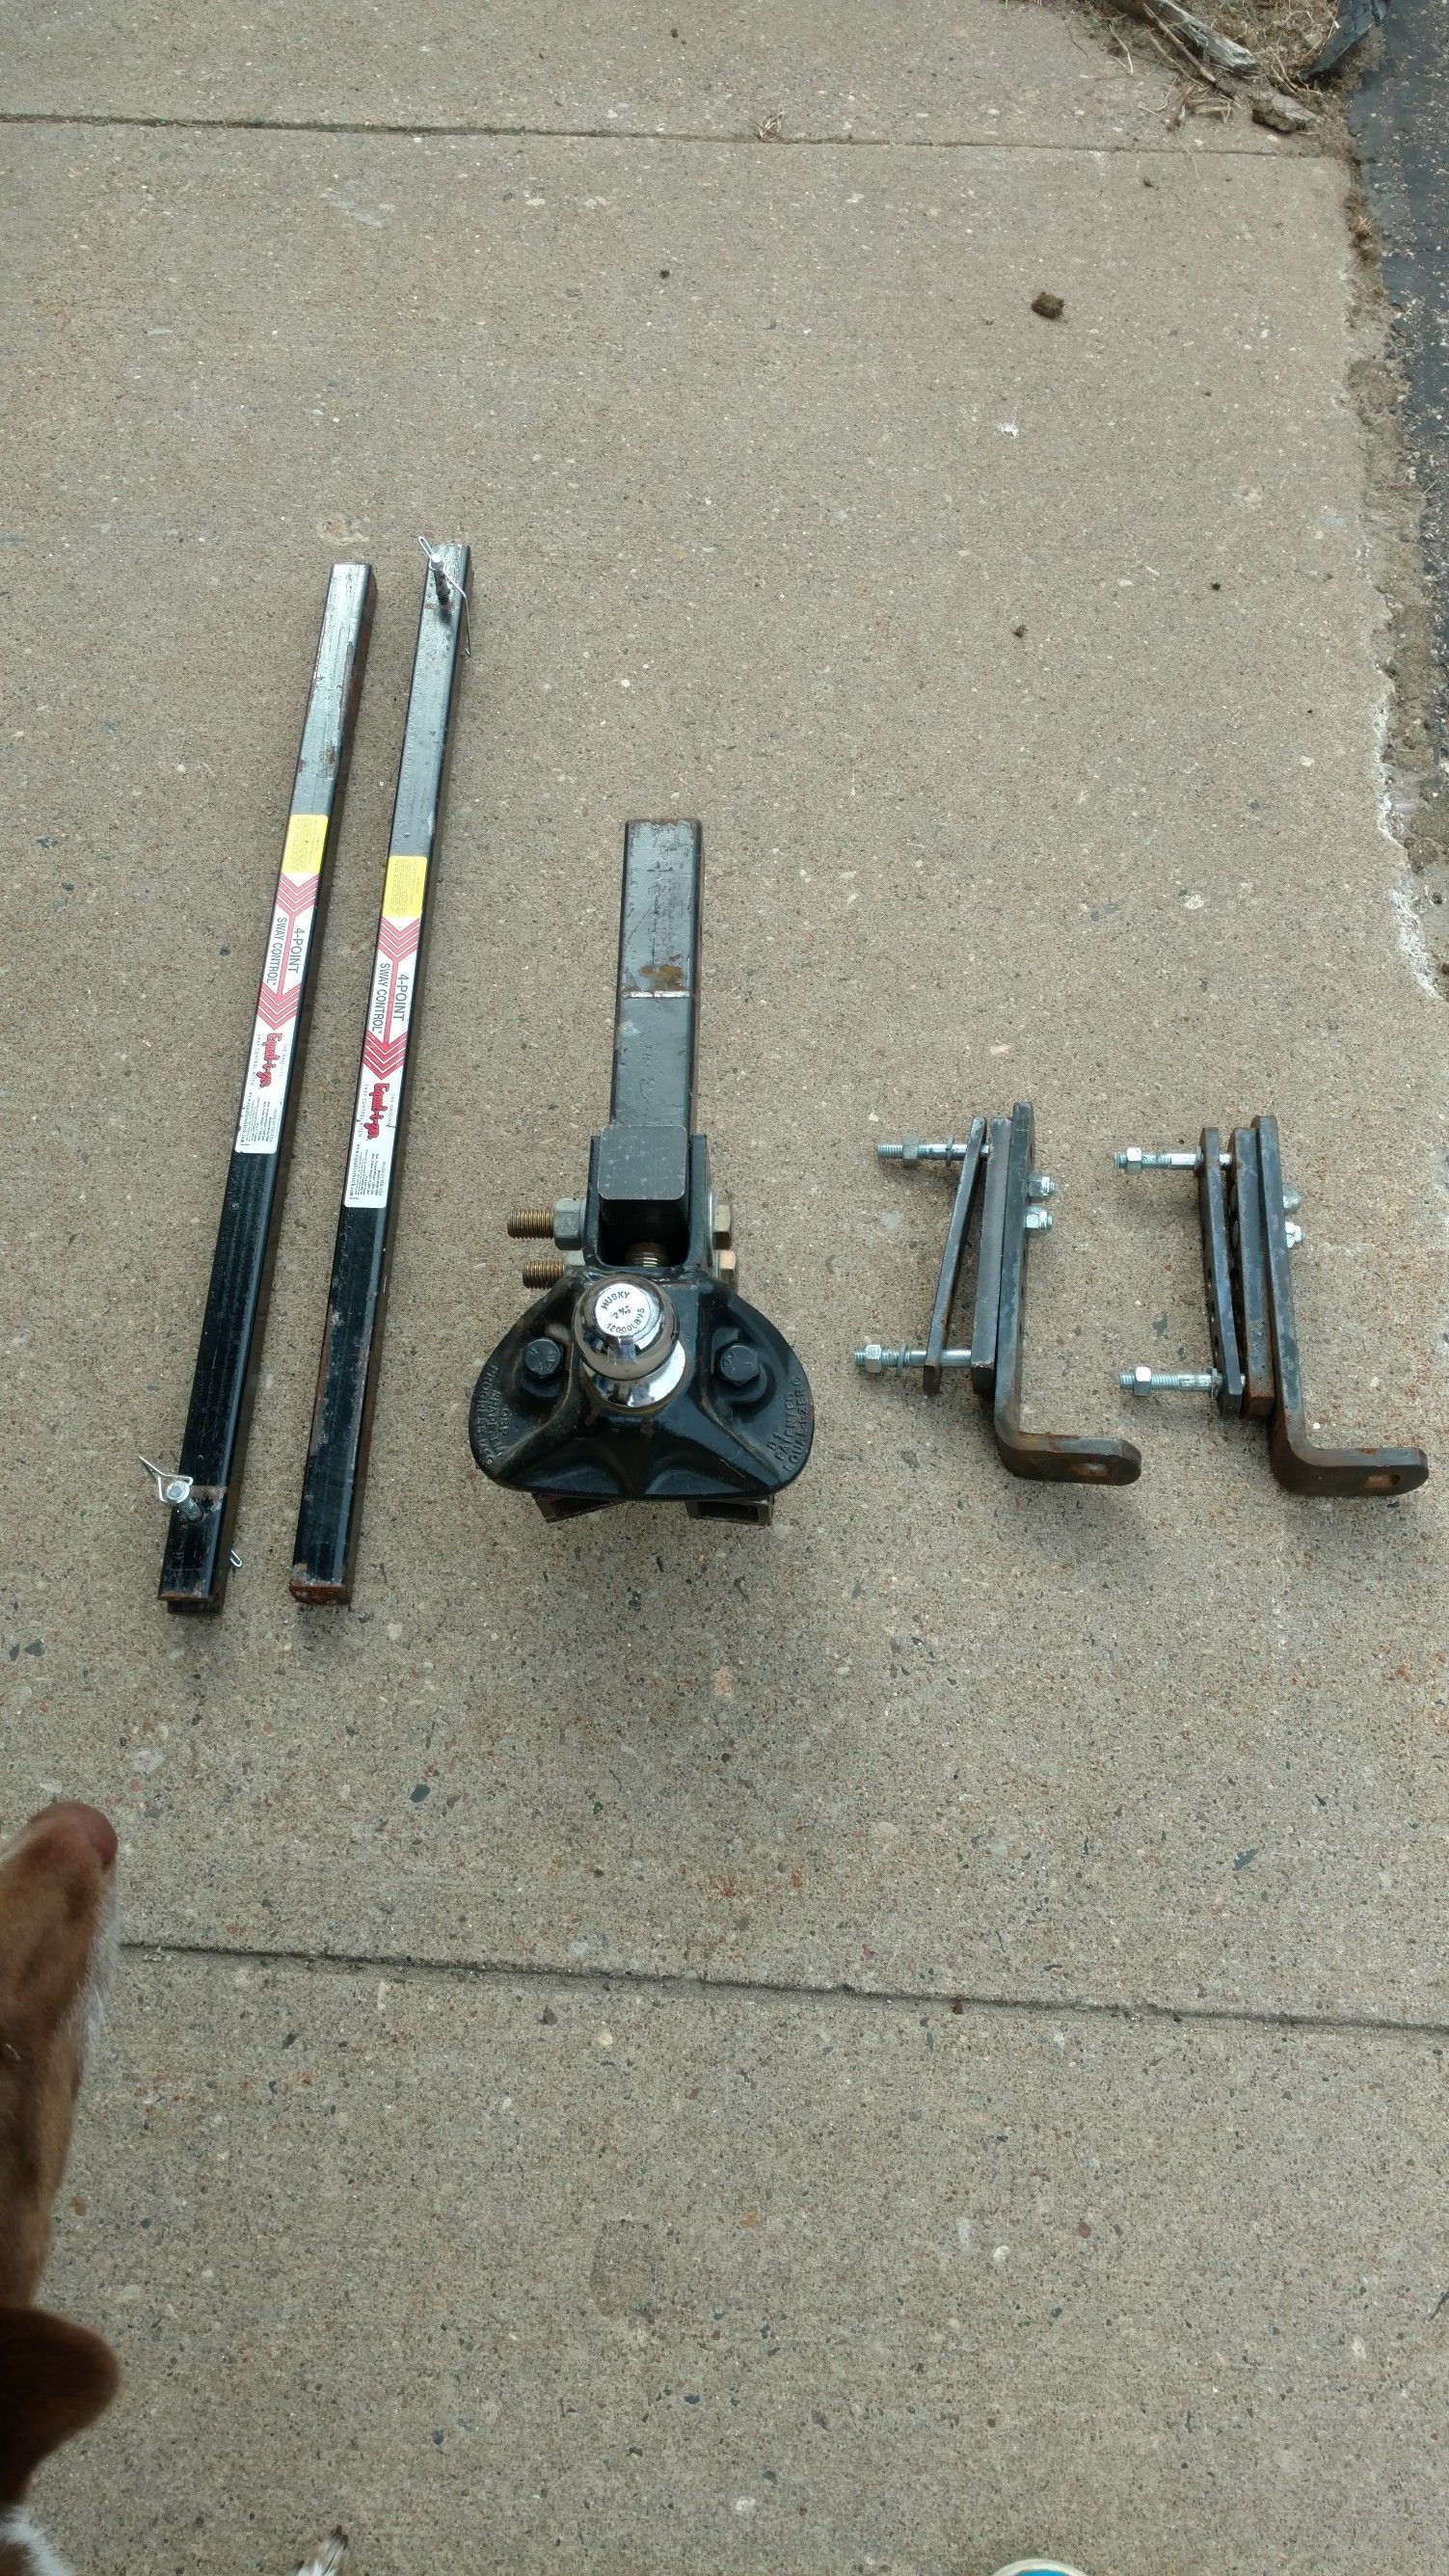 10,000 pound 4-point sway control hitch equalizer Used 2 years.